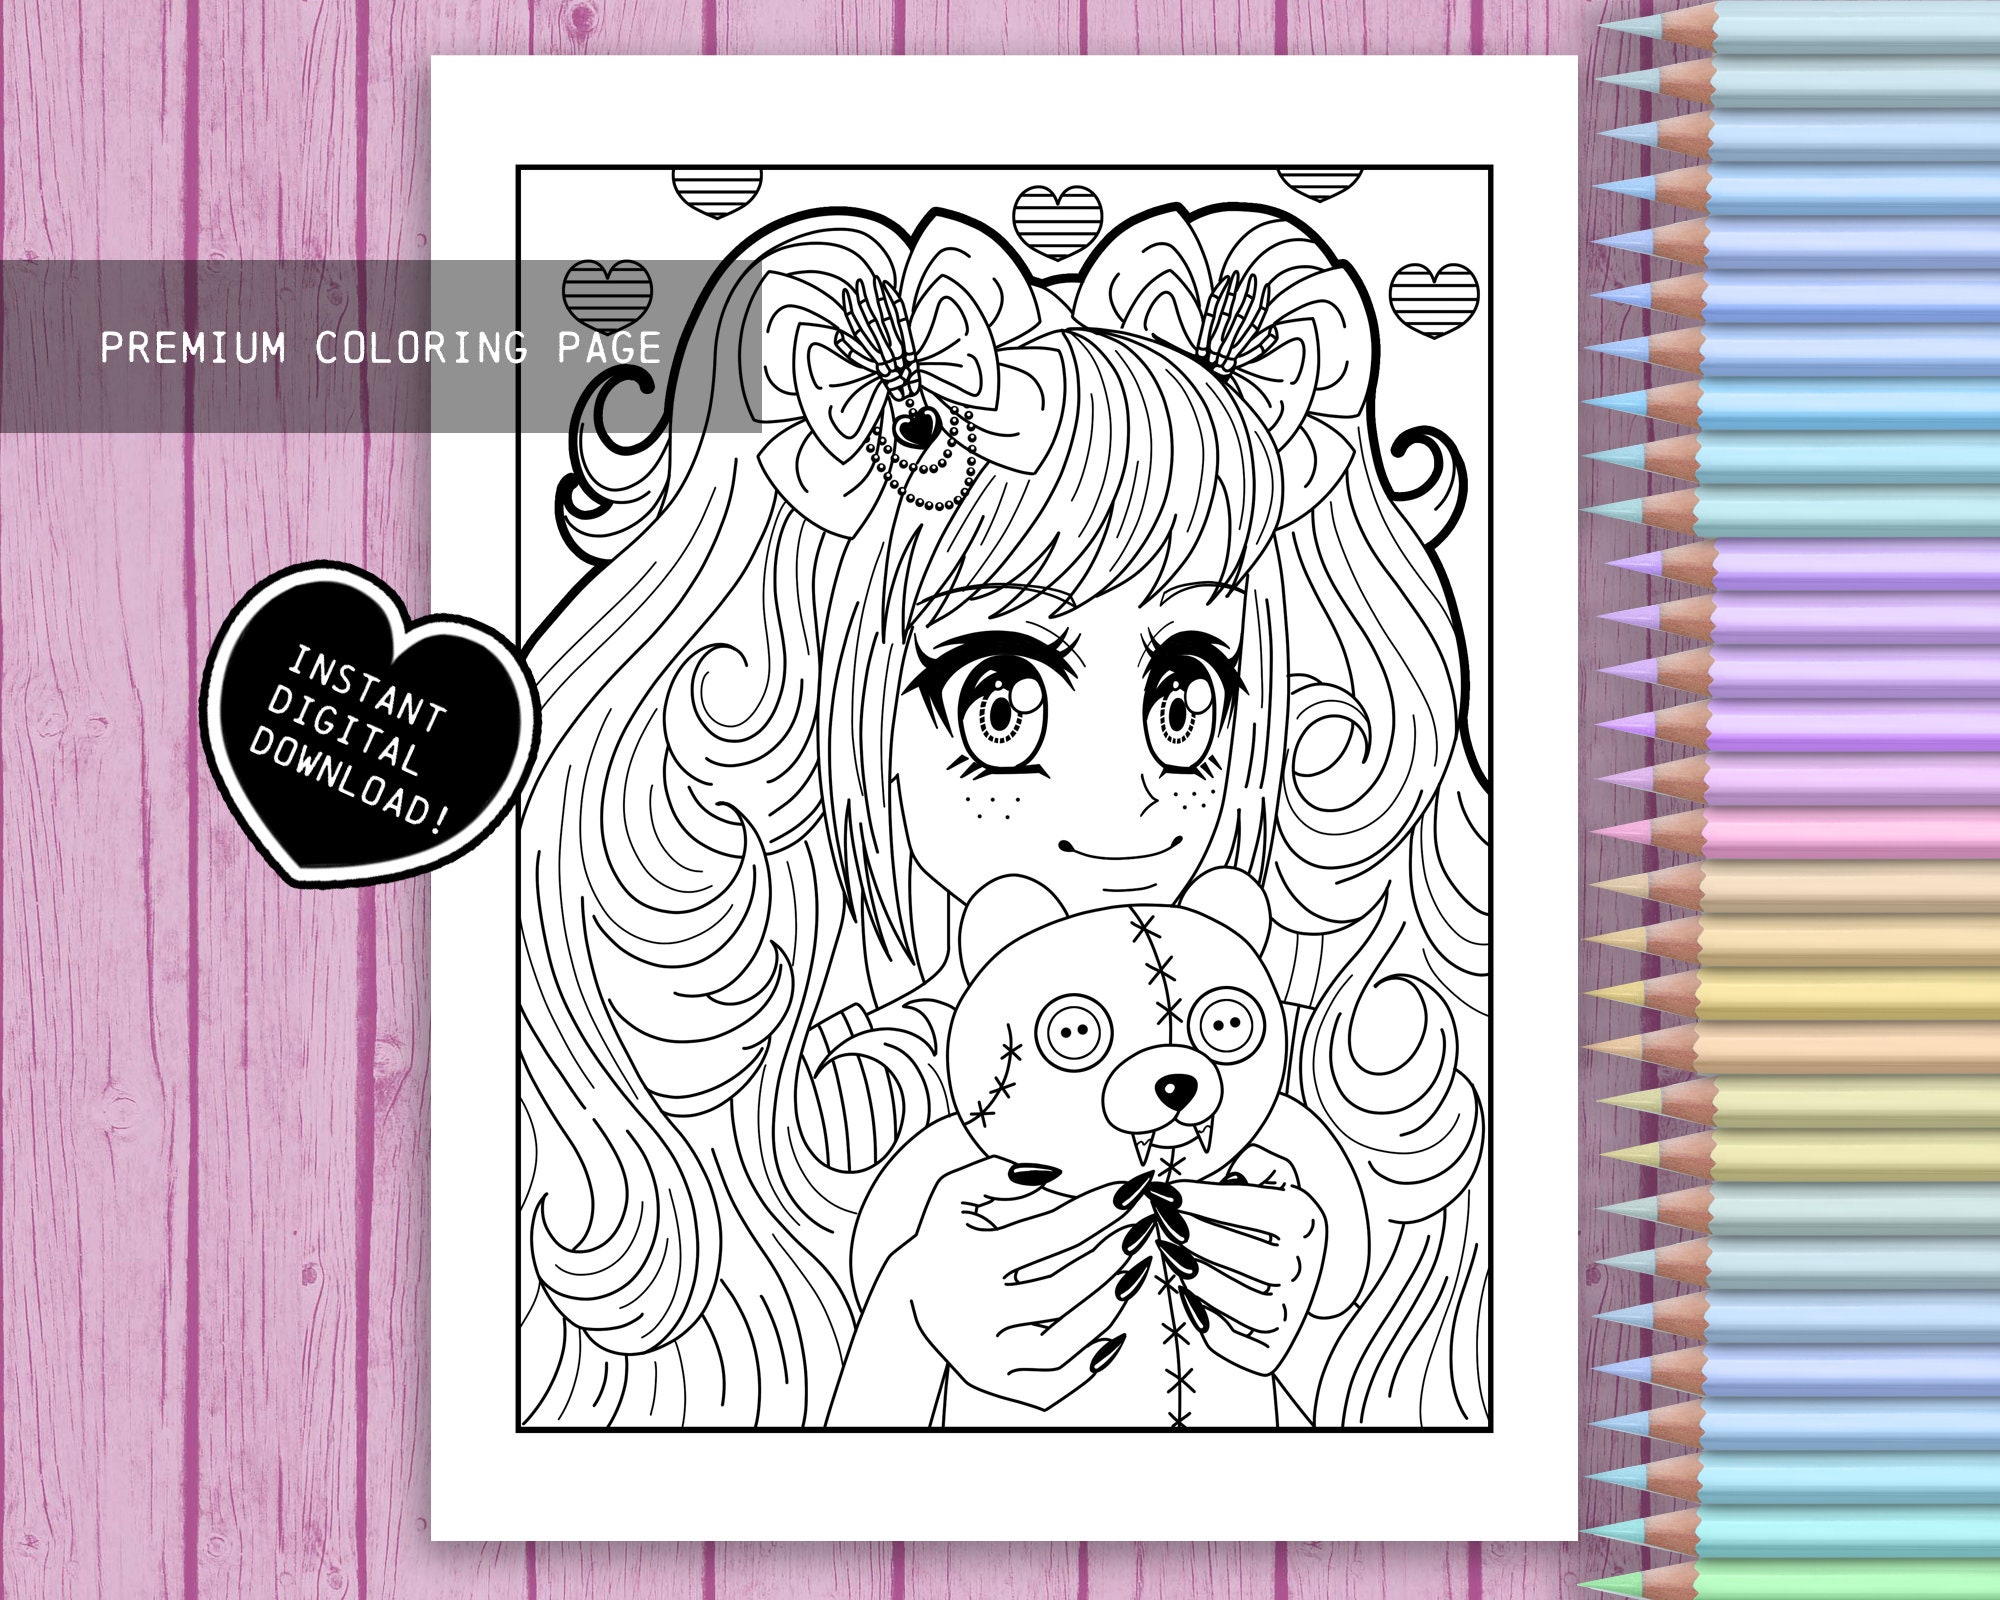 Office girl cartoon doodle kawaii anime coloring page cute illustration  imagepicture free download 450147867lovepikcom